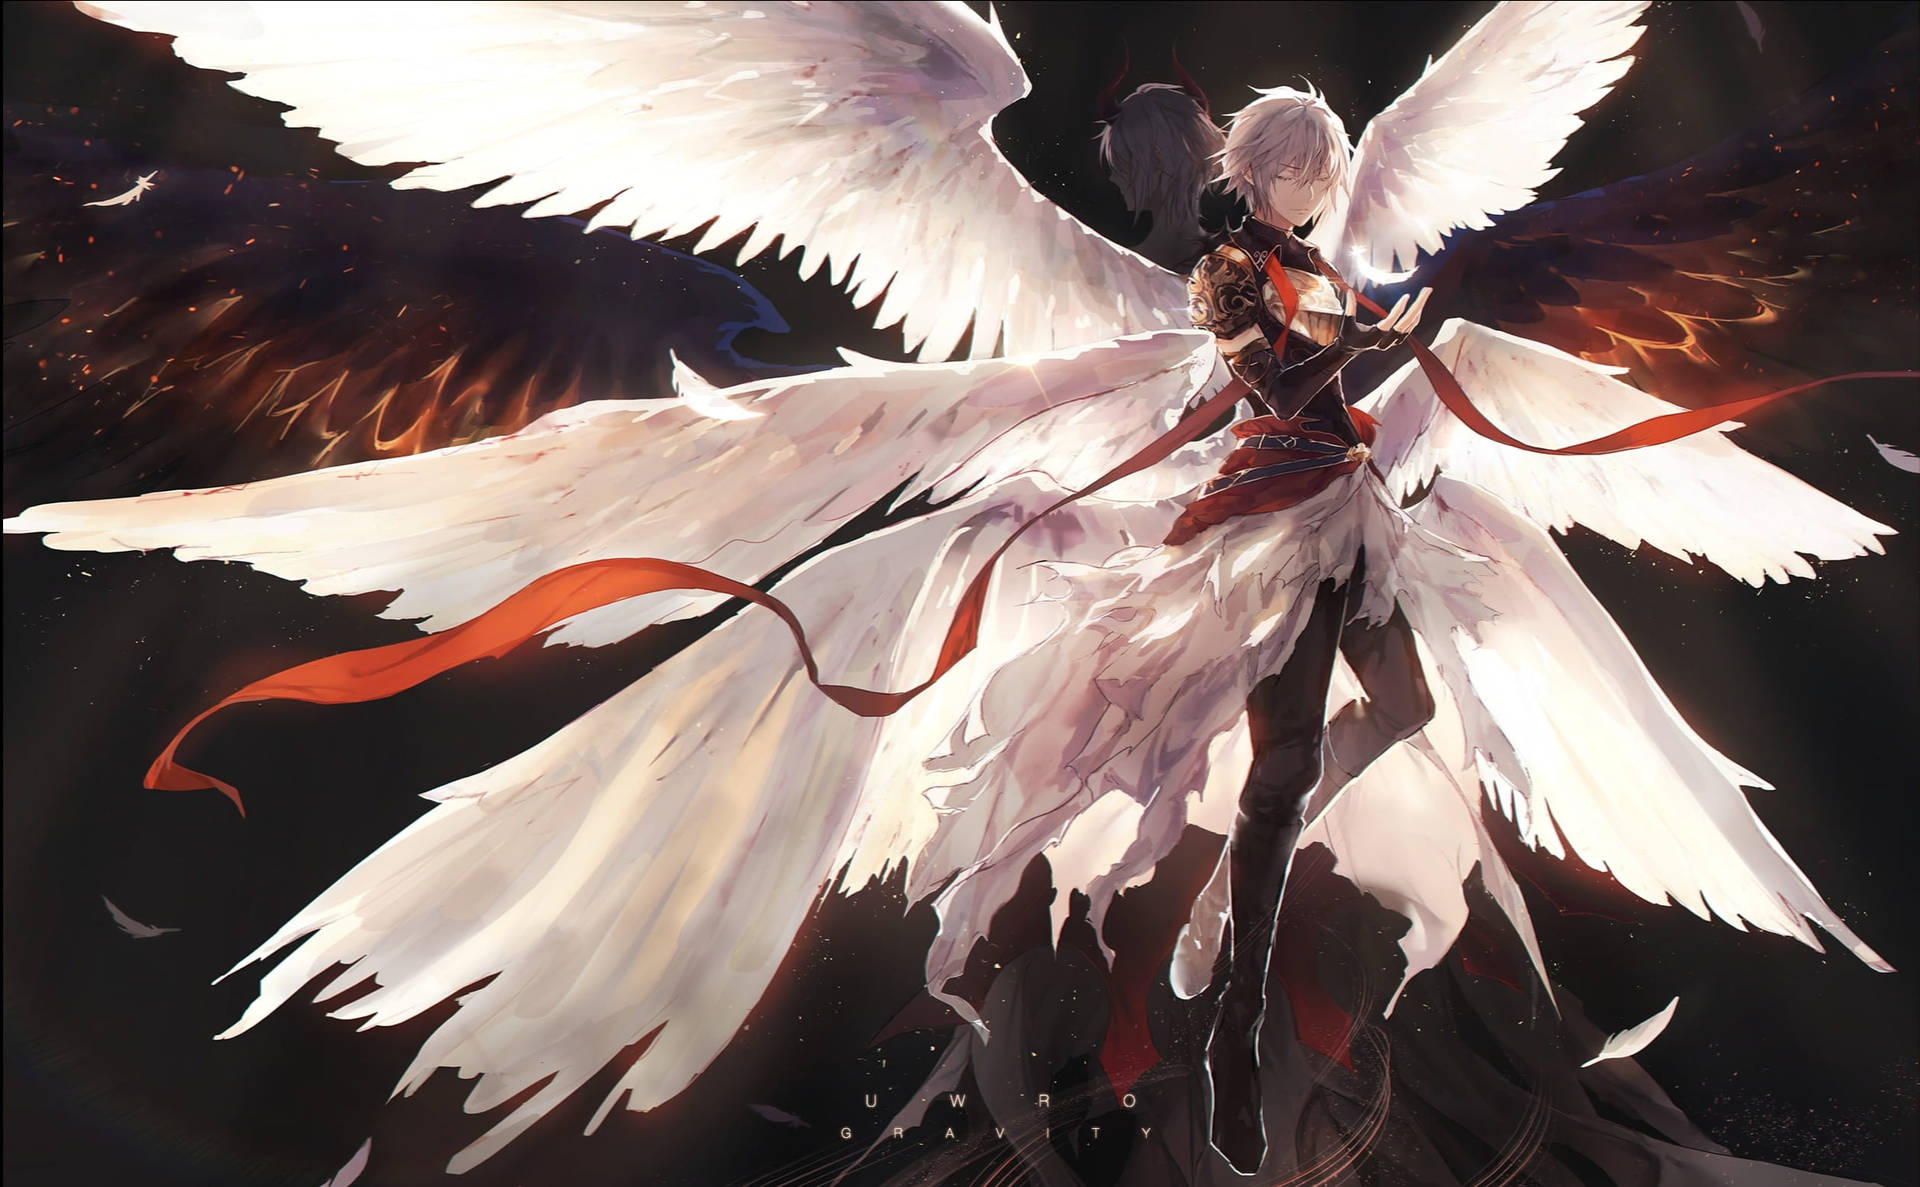 Angel Anime Boy With Wings Wallpaper Download | MobCup-demhanvico.com.vn